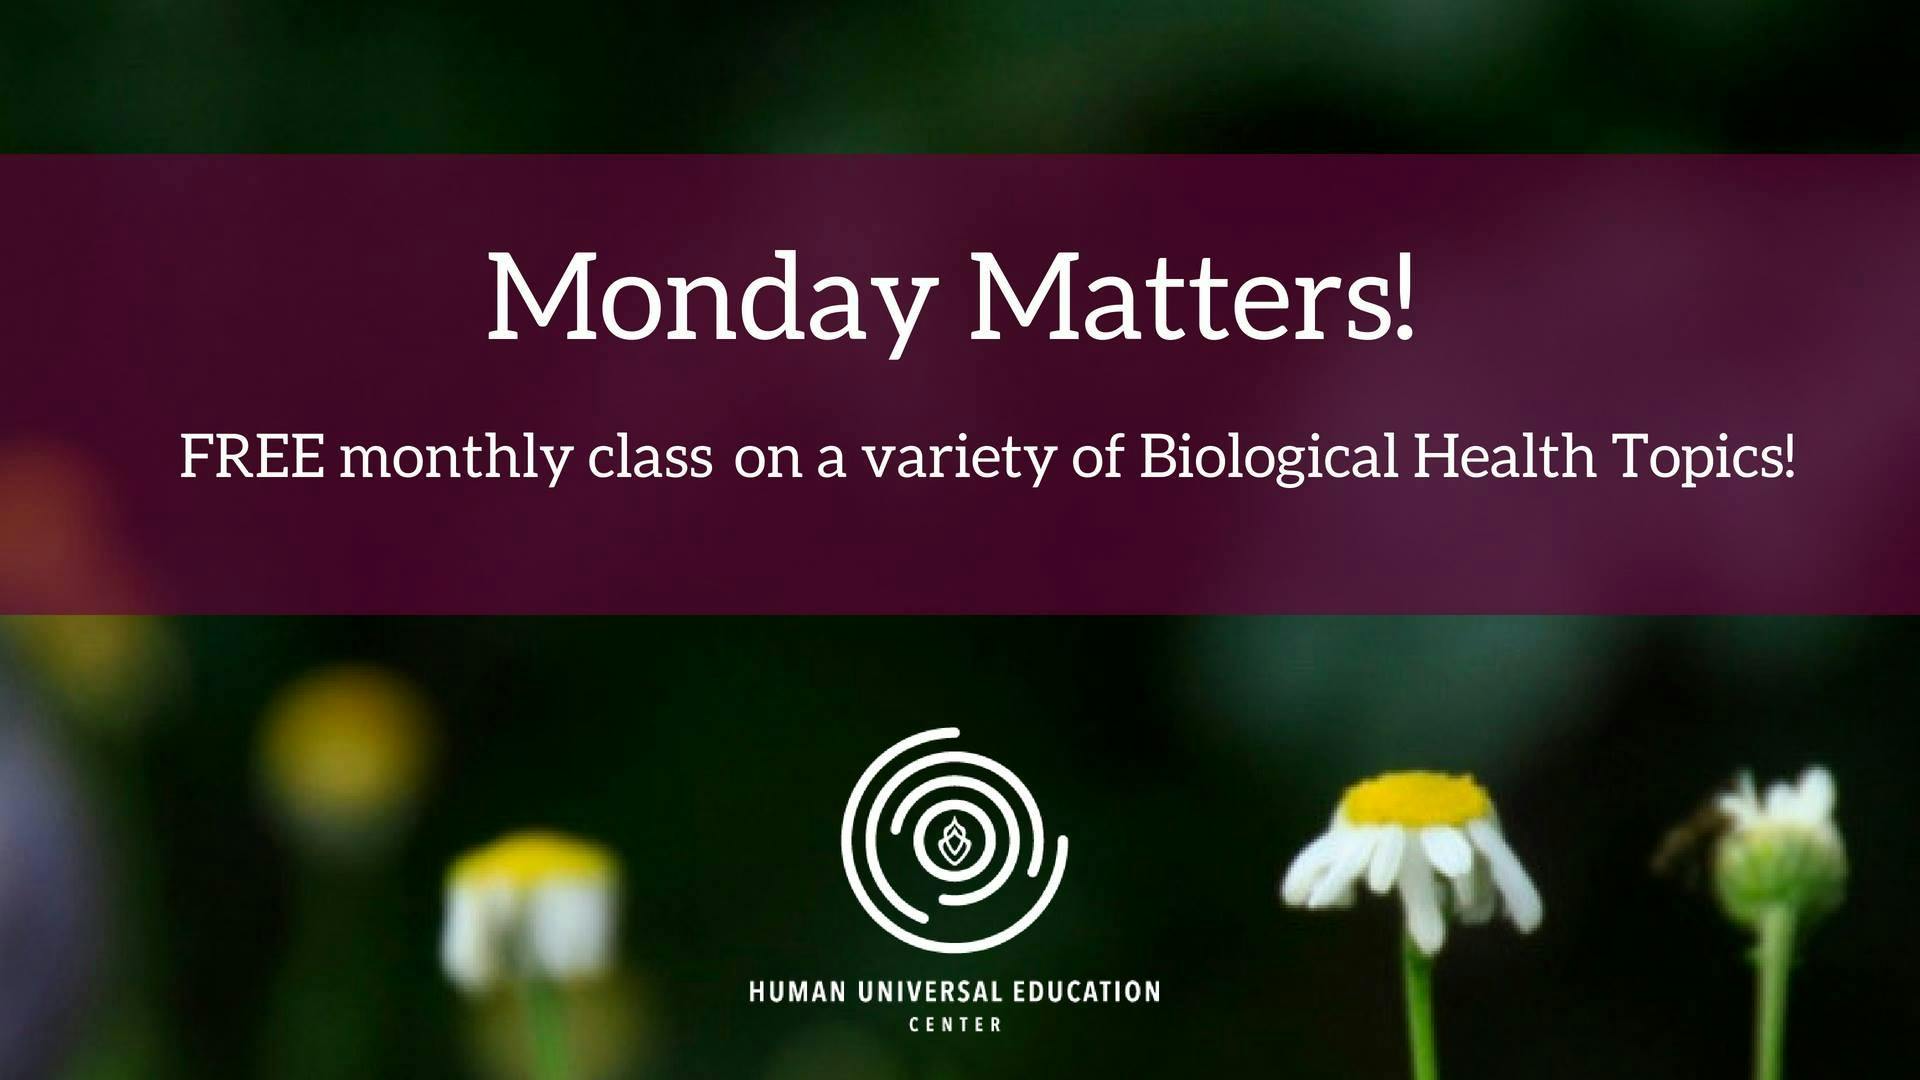 Monday Matters! Free Monthly Class on Biological Health Topics